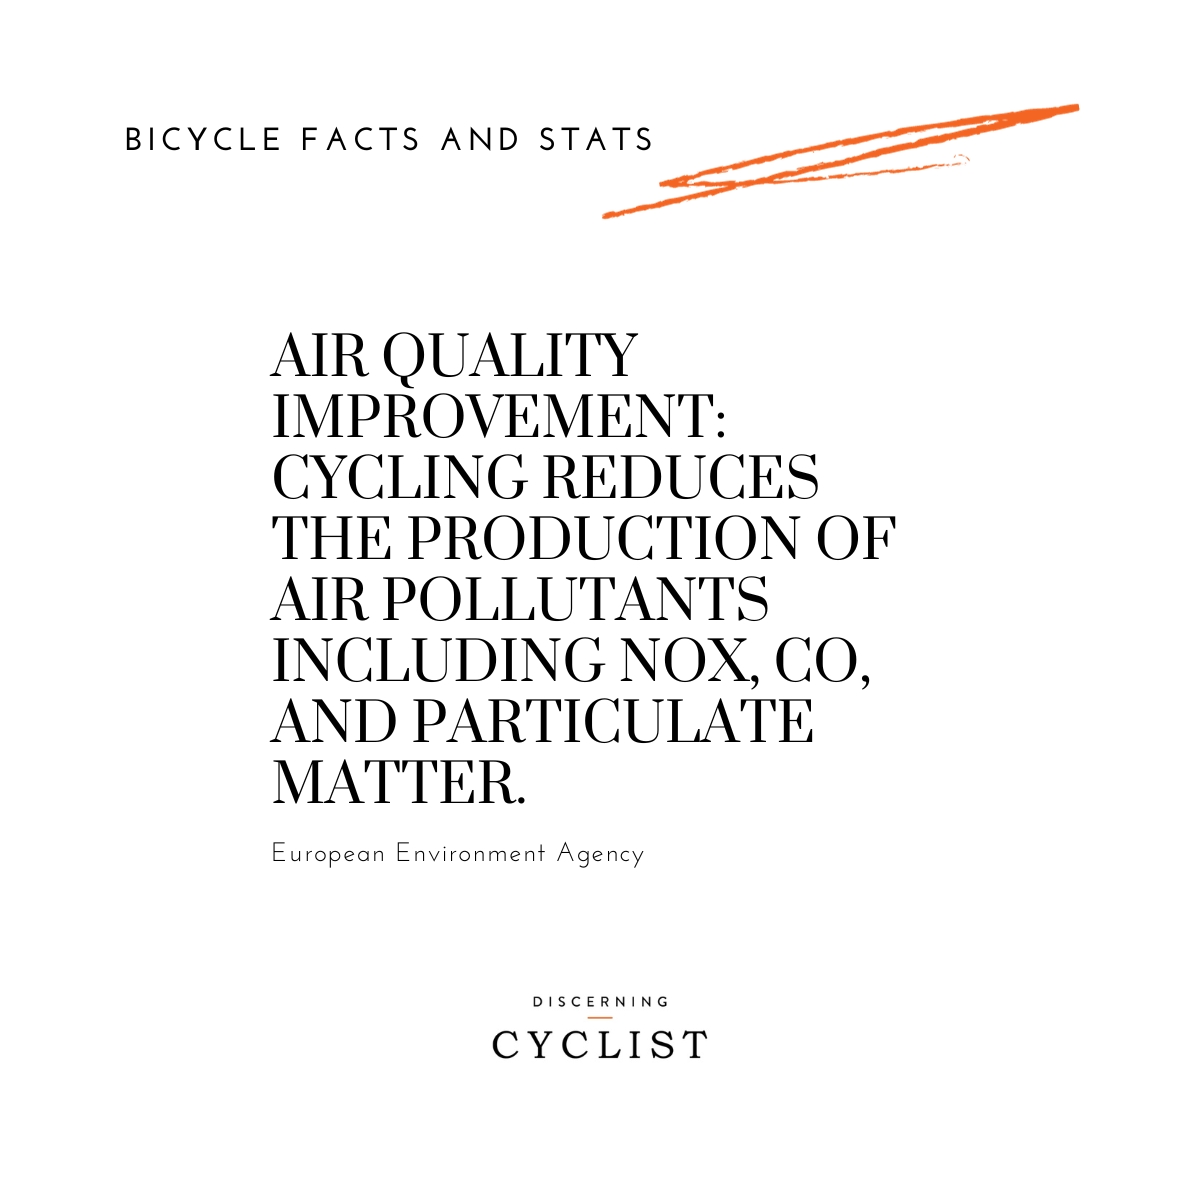 Air Quality Improvement: Cycling reduces the production of air pollutants including NOx, CO, and particulate matter.